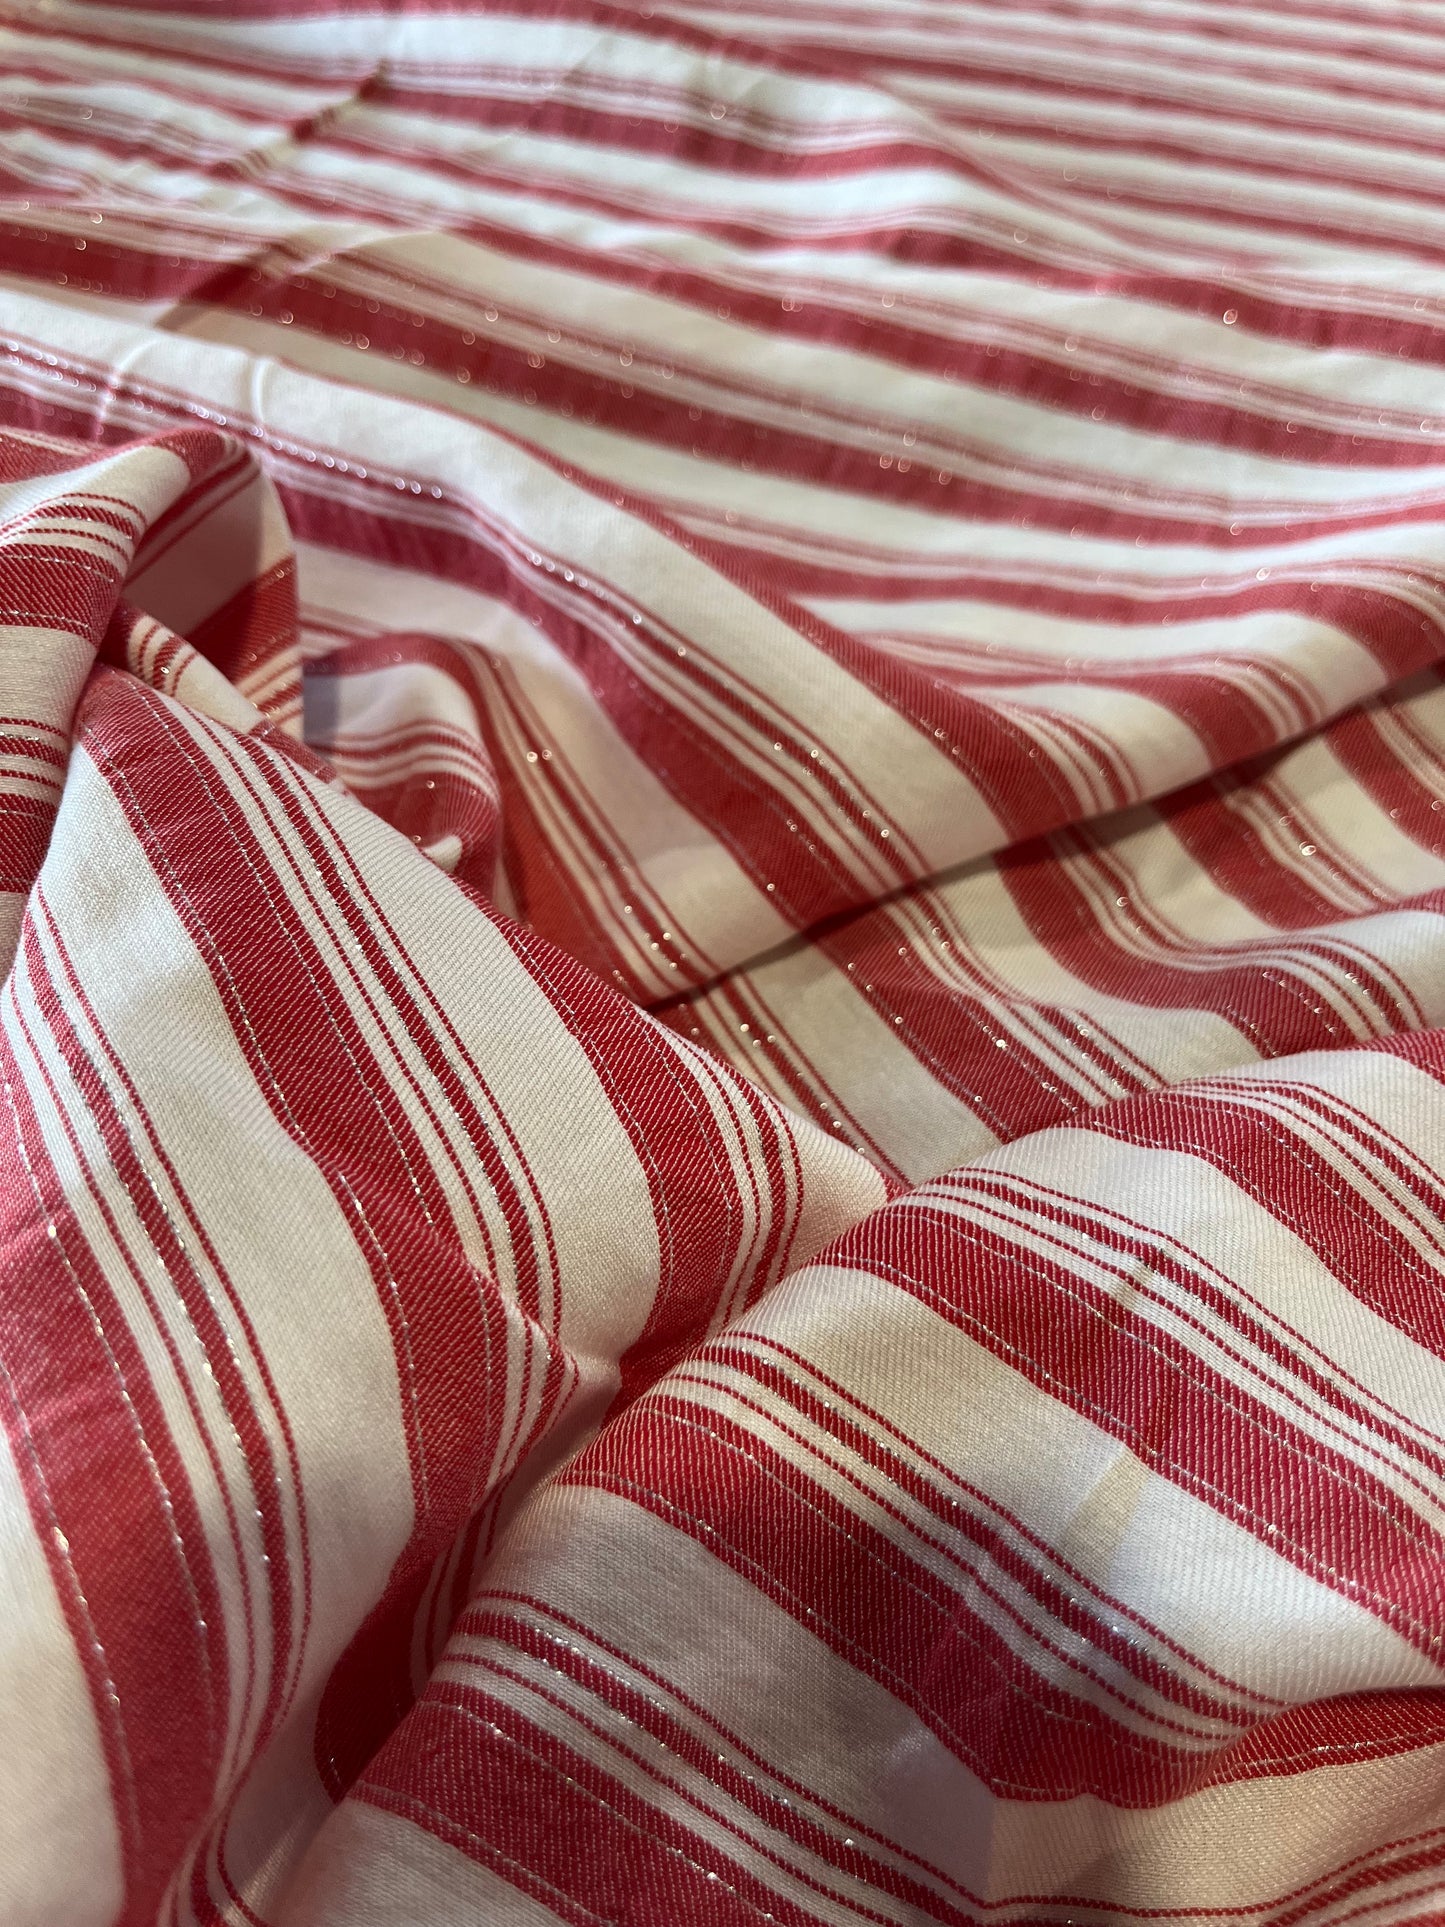 Pisa 052 woven stripes red white with lurex